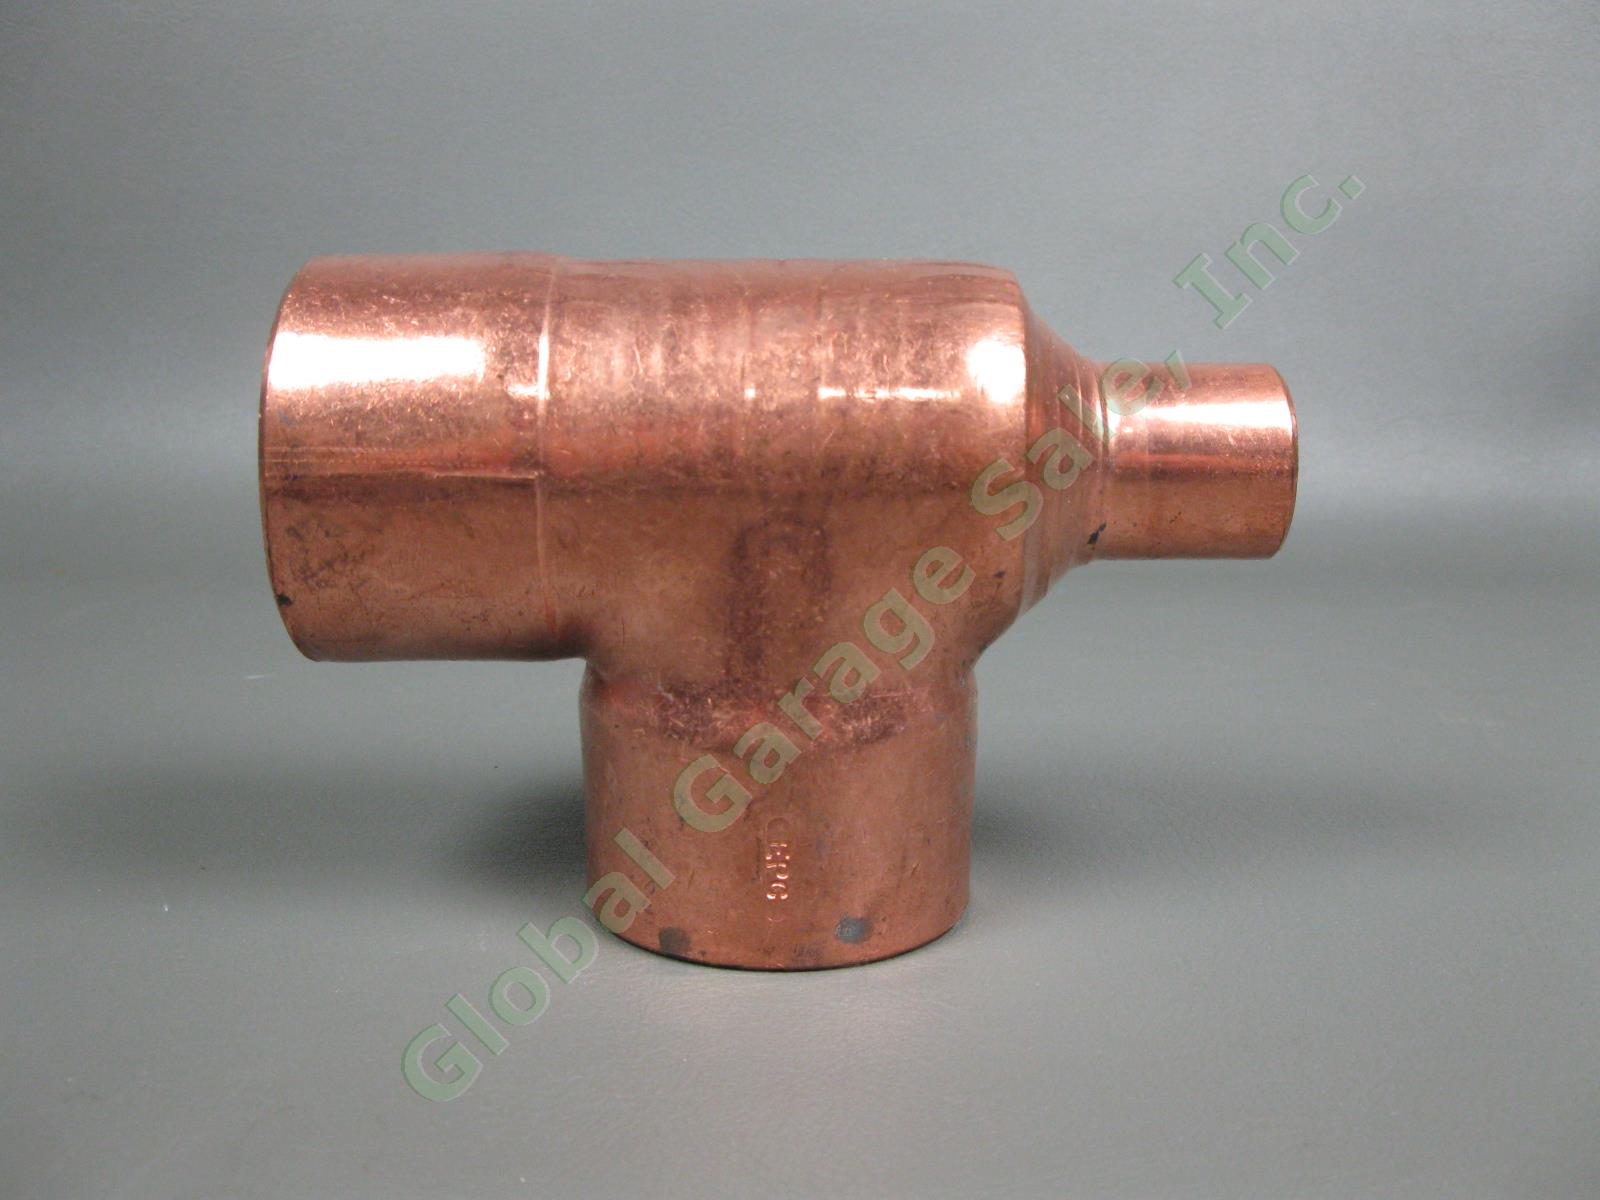 NEW 1" x 2" x 2" Copper EPC Reducing Sweat Tee Pipe Fitting Run Connection Eqpt